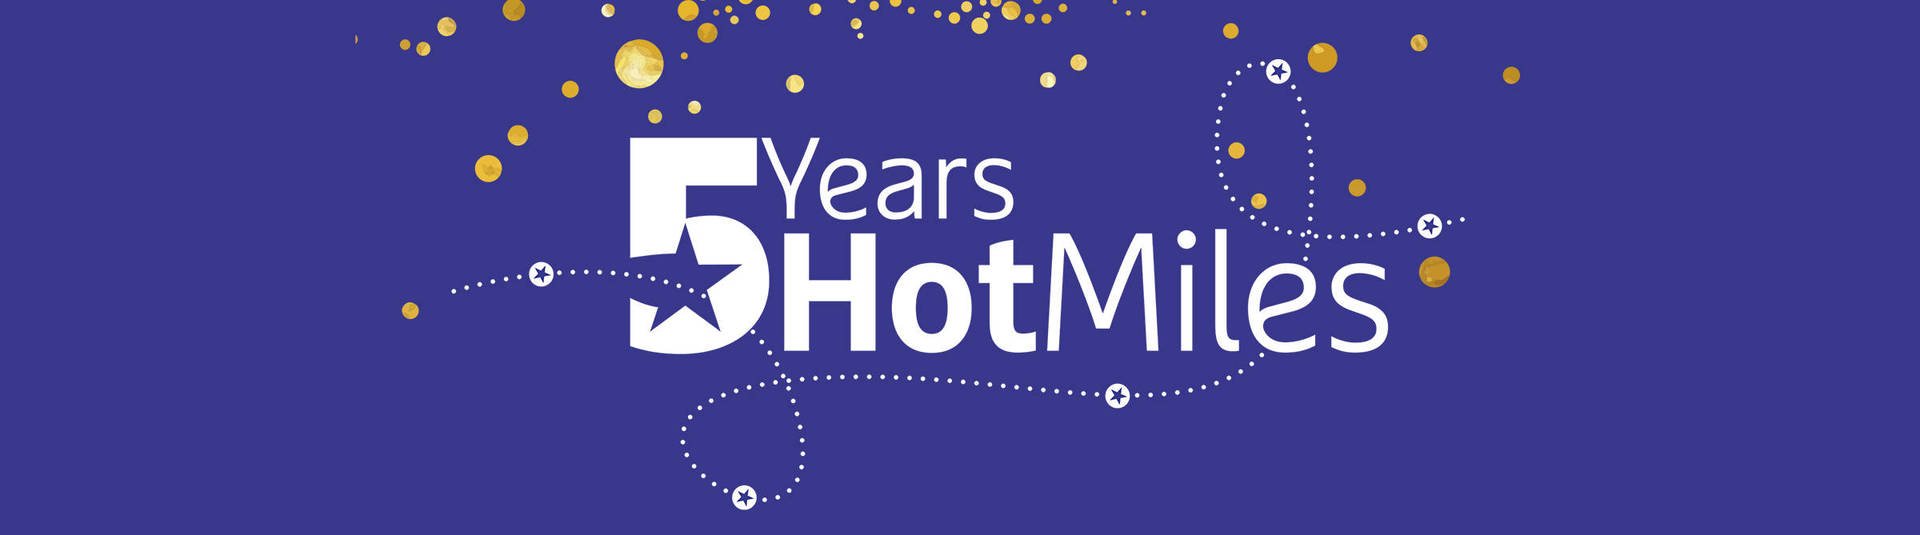 5 years HotMiles - H-Hotels.com